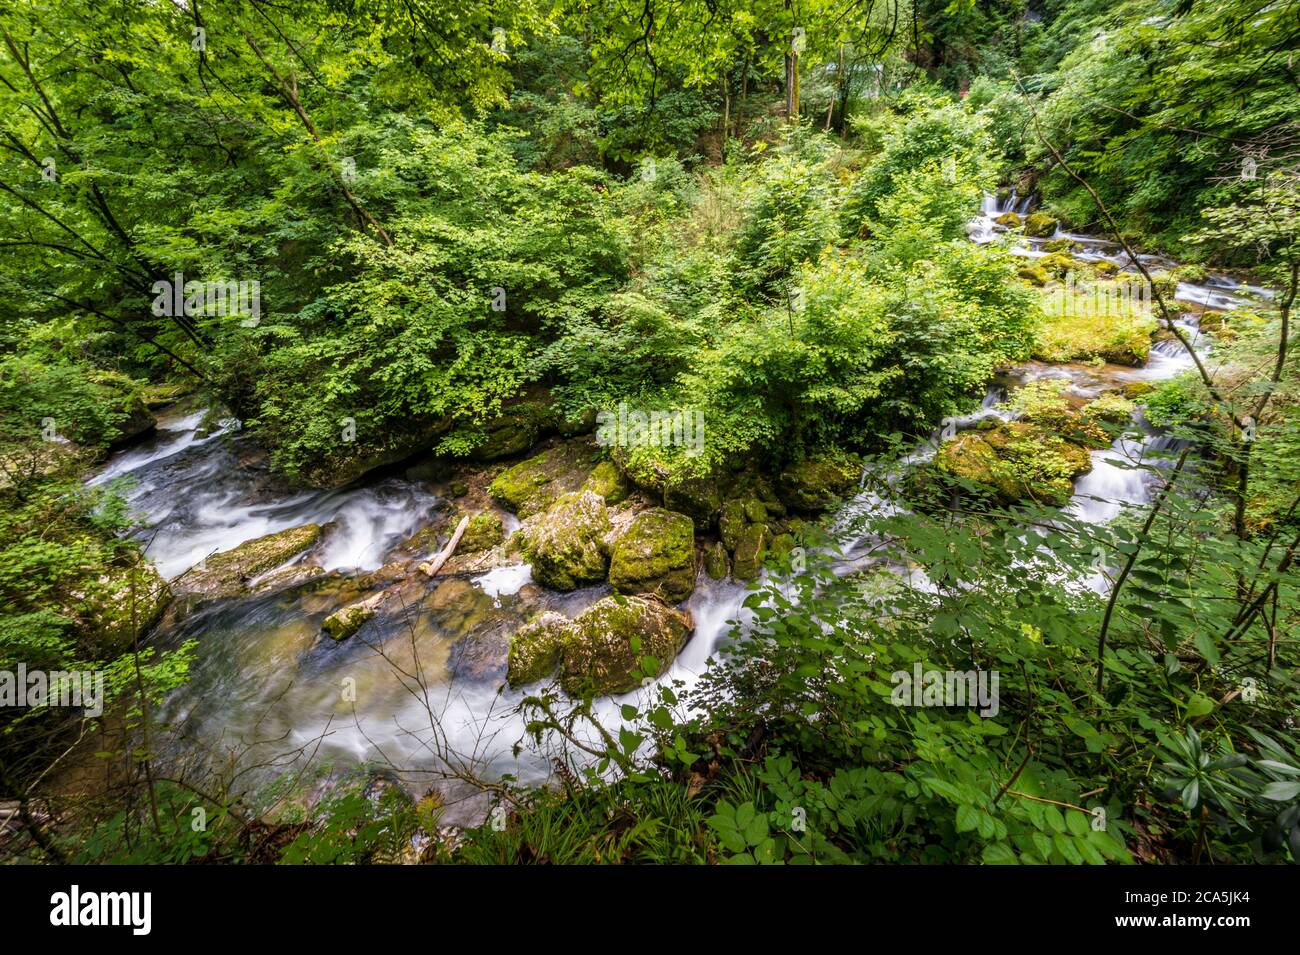 France, Isere, Vercors Regional Park, hike to the Cuves de Sassenage on the banks of the Furon river Stock Photo